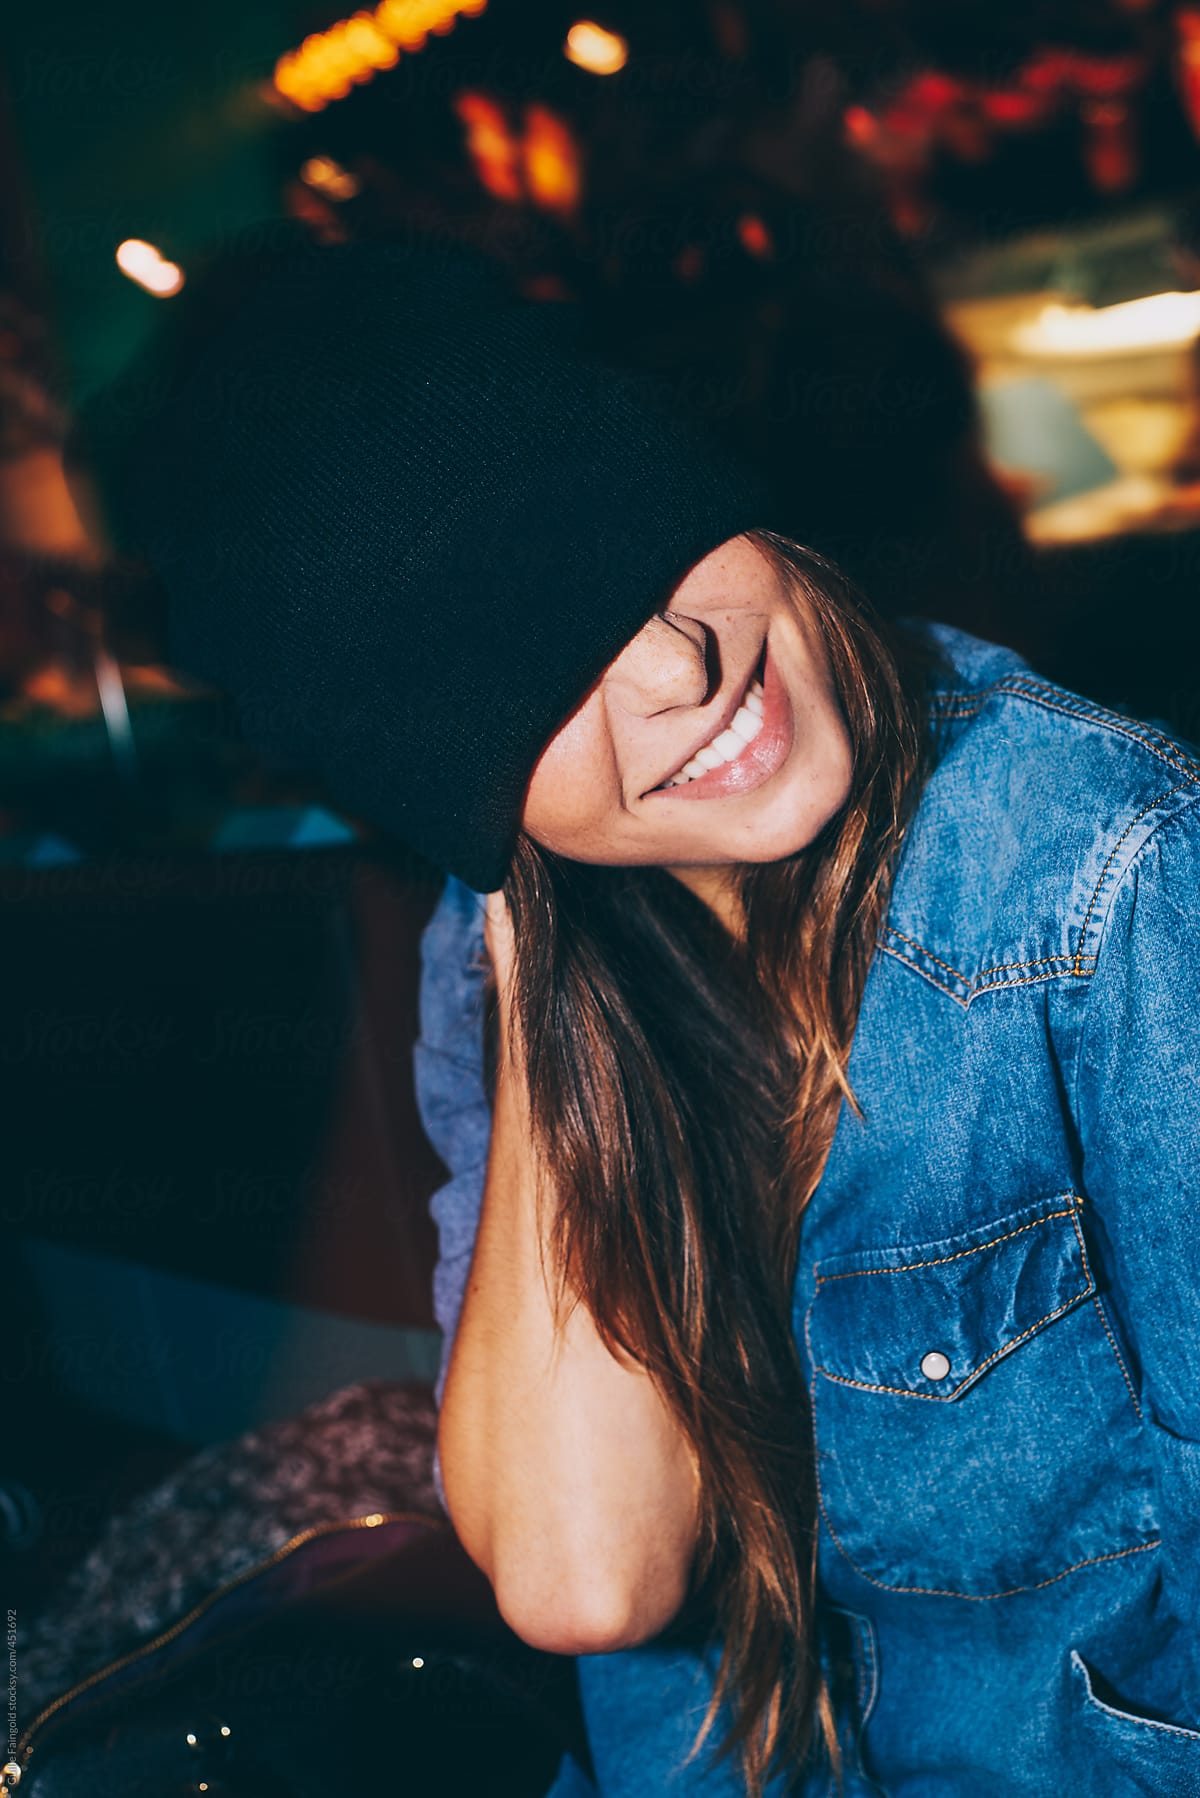 Girl in bar hiding face with hat